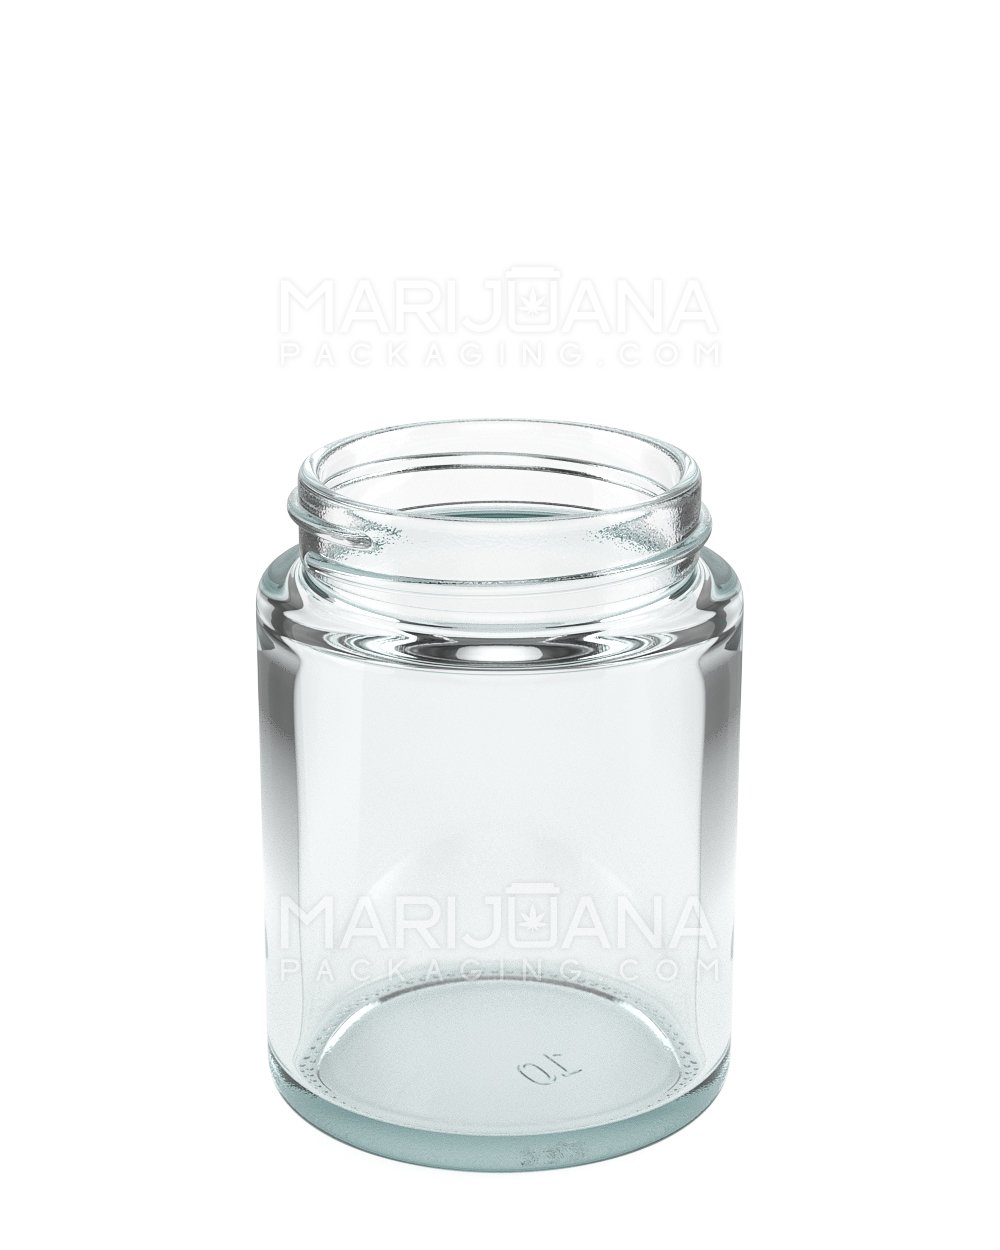 Straight Sided Clear Glass Jars | 50mm - 4oz - 100 Count - 2